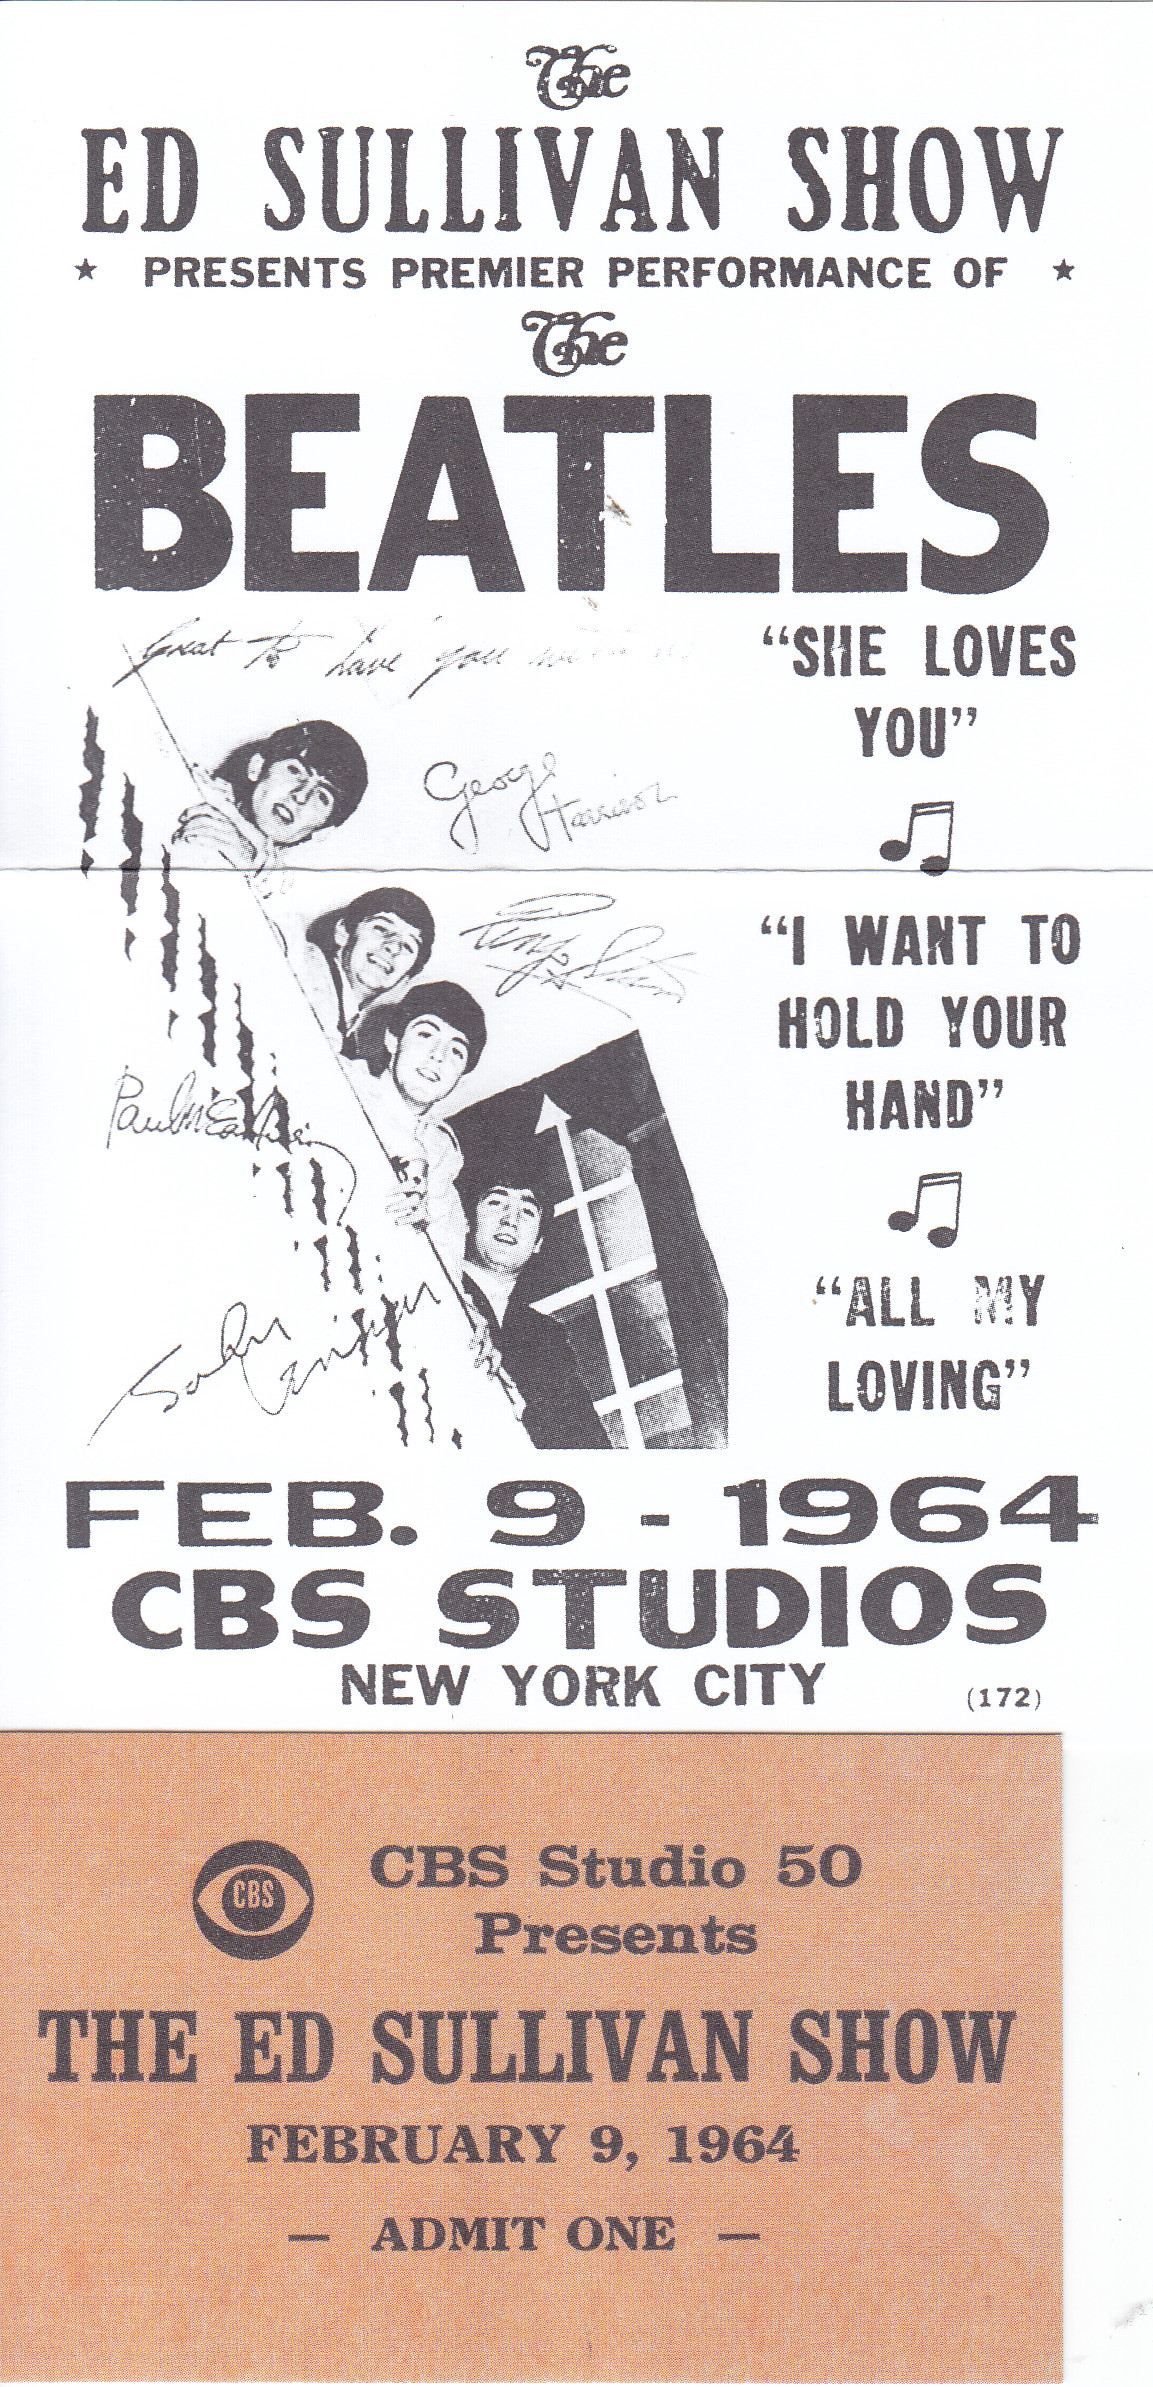 Unused ticket for the February 9, 1964, taping of The Ed Sullivan Show, featuring The Beatles.